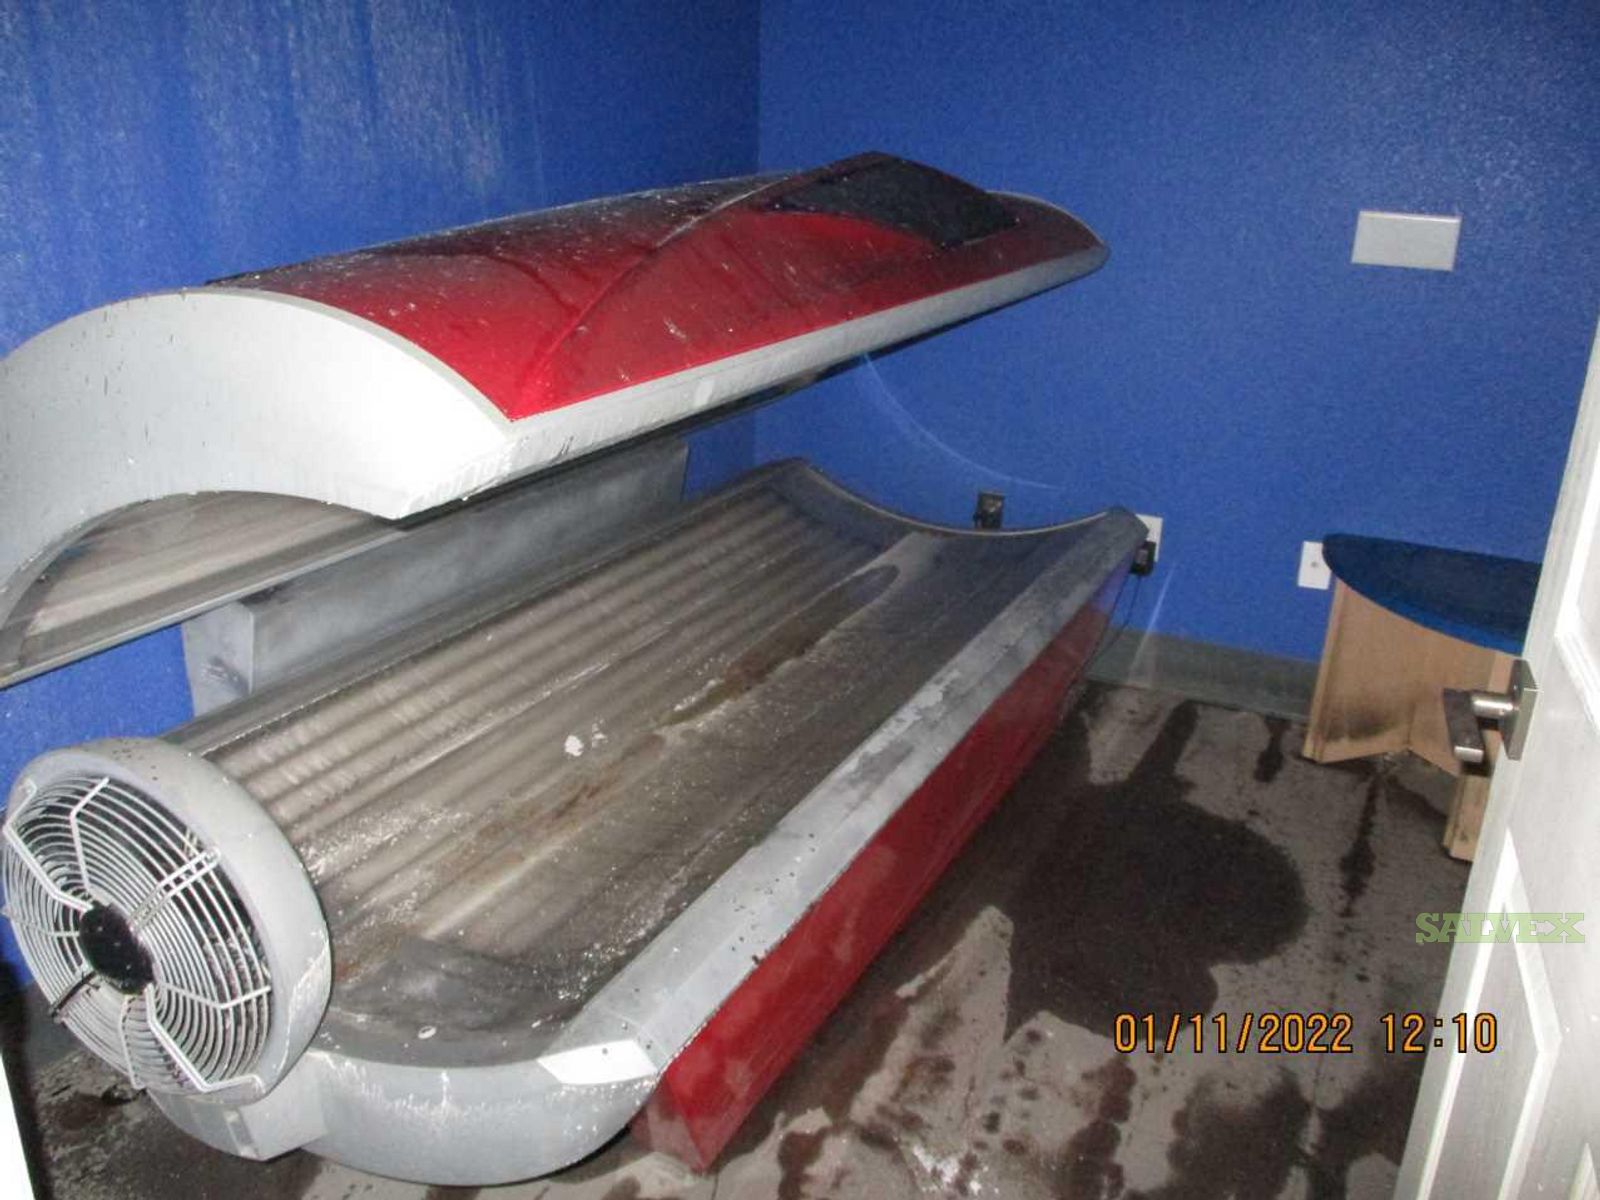 Tanning Bed Facility Assets - Insurance Claim (1 Lot )